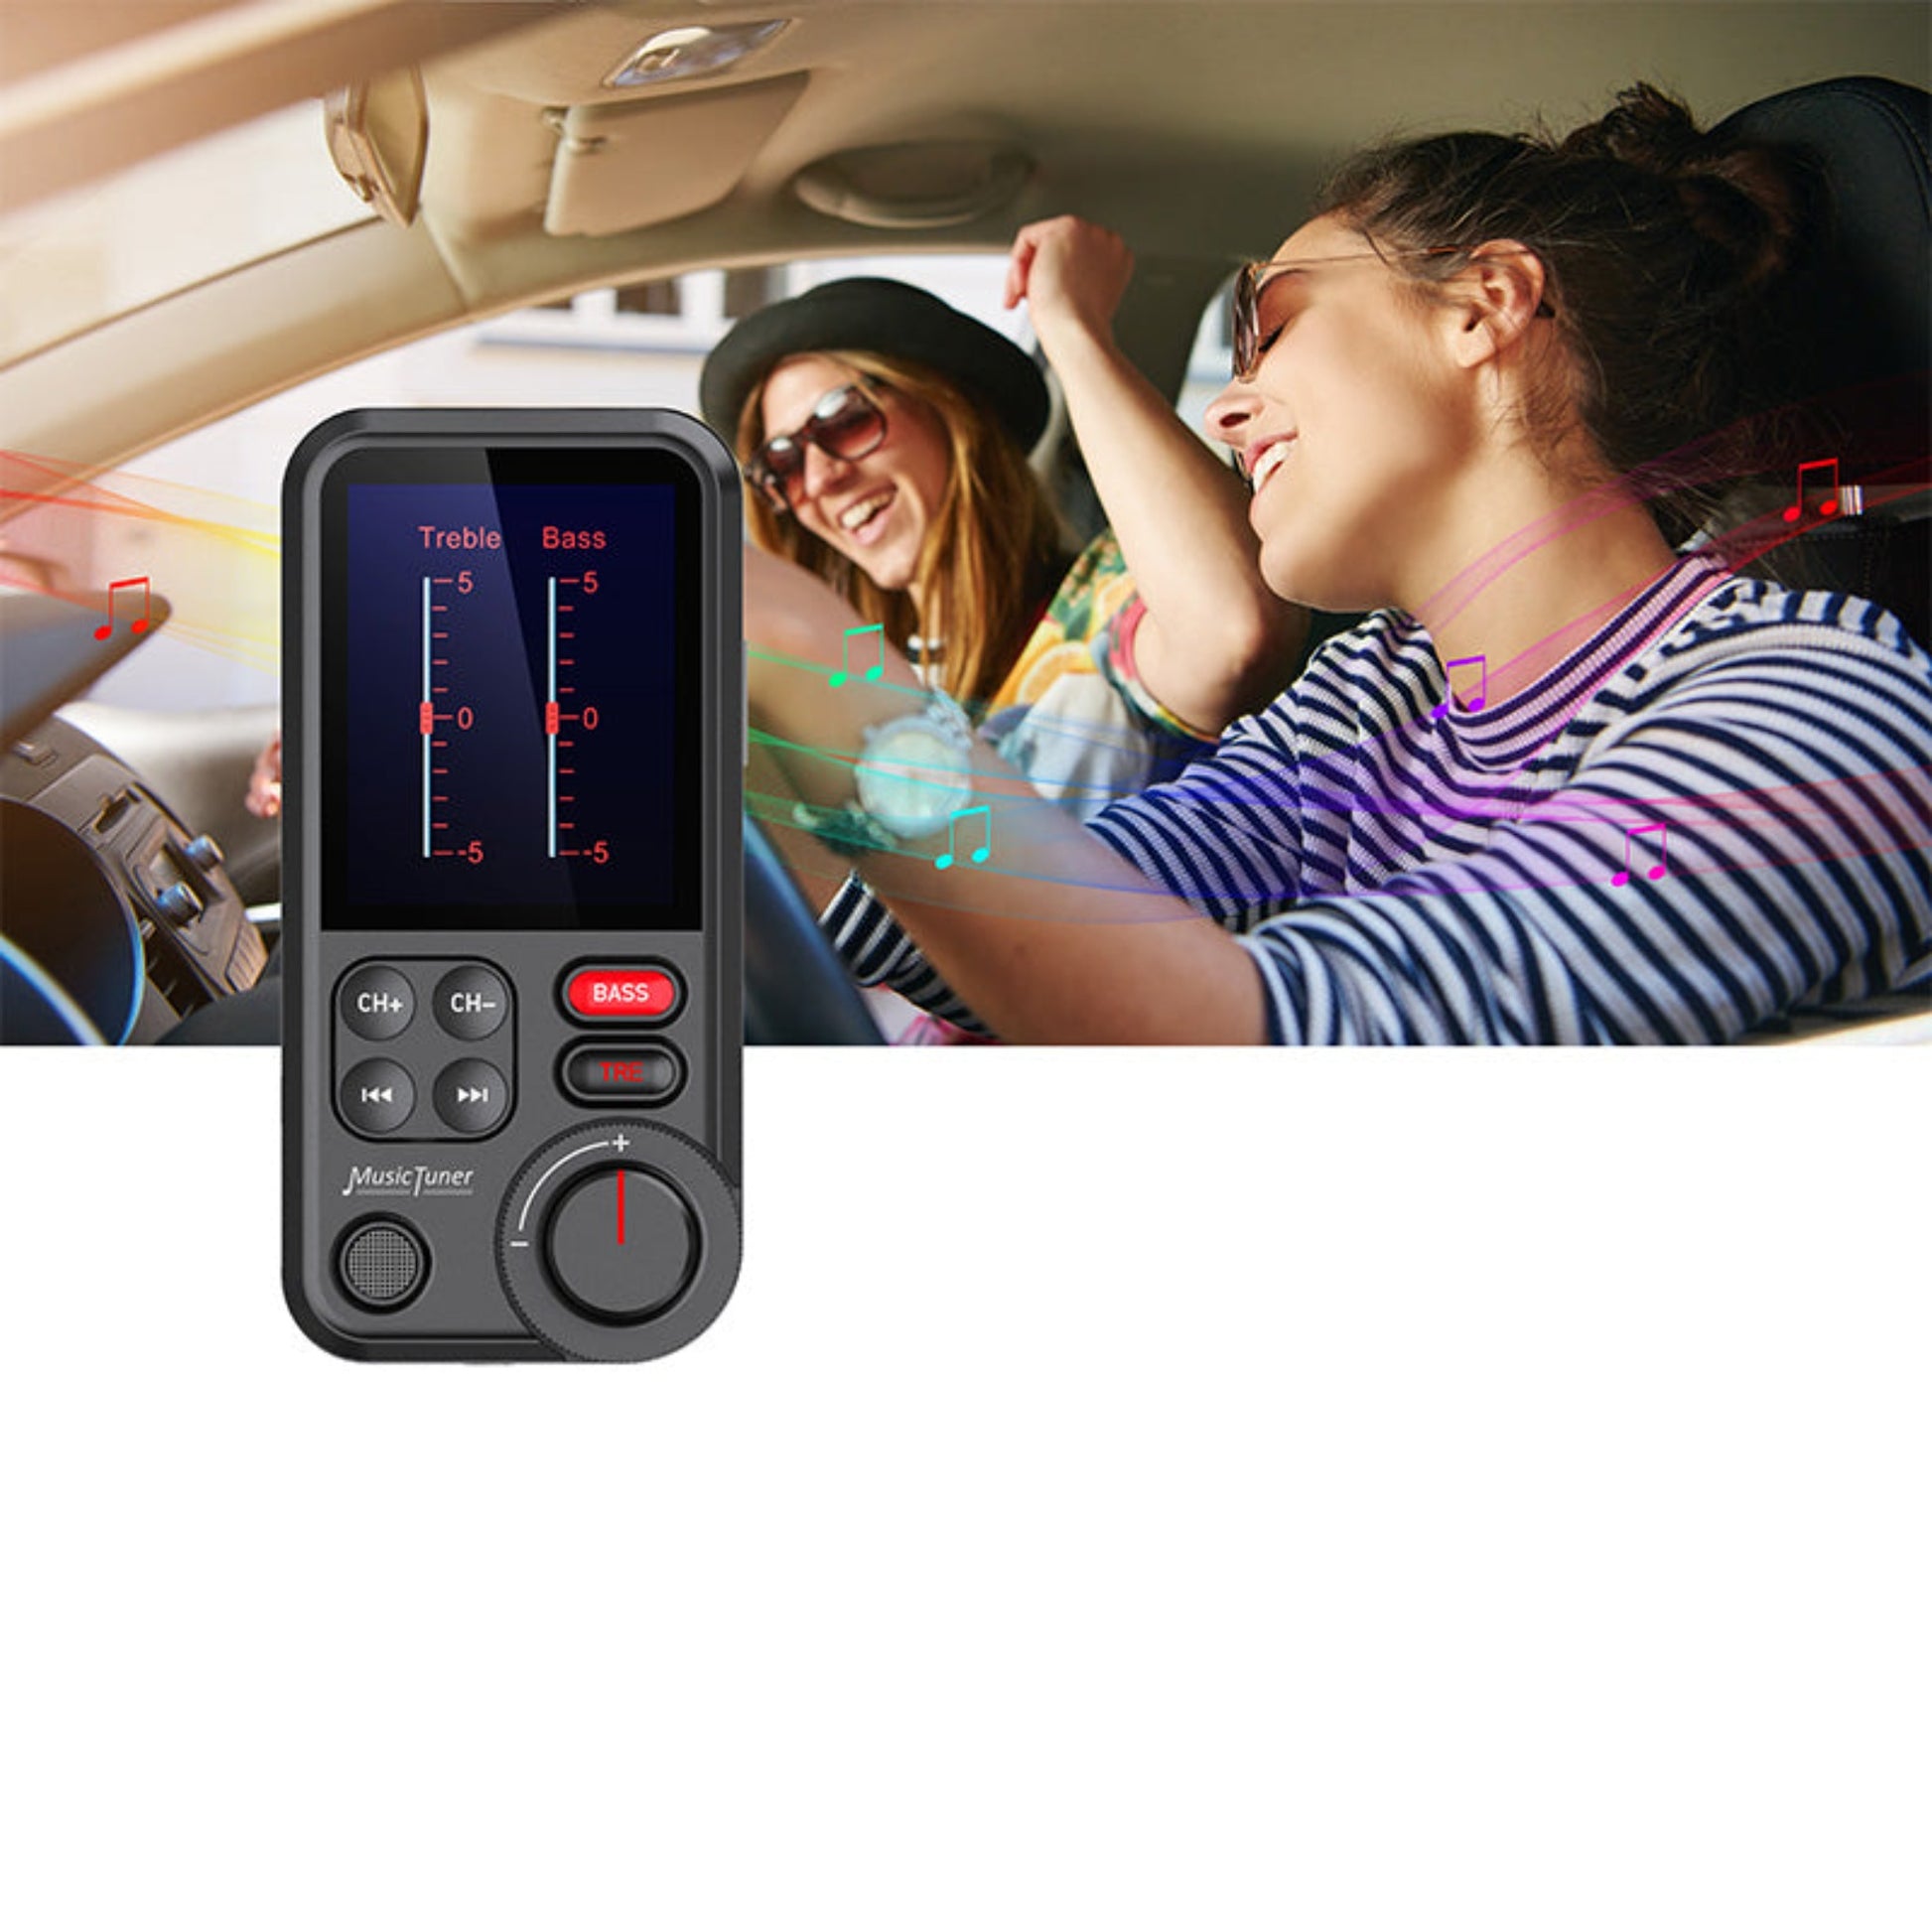 All-in-one FM Transmitter, Bluetooth and Car Charger - Nile Palace Treasures all-in-one-fm-transmitter-bluetooth-and-car-charger, 